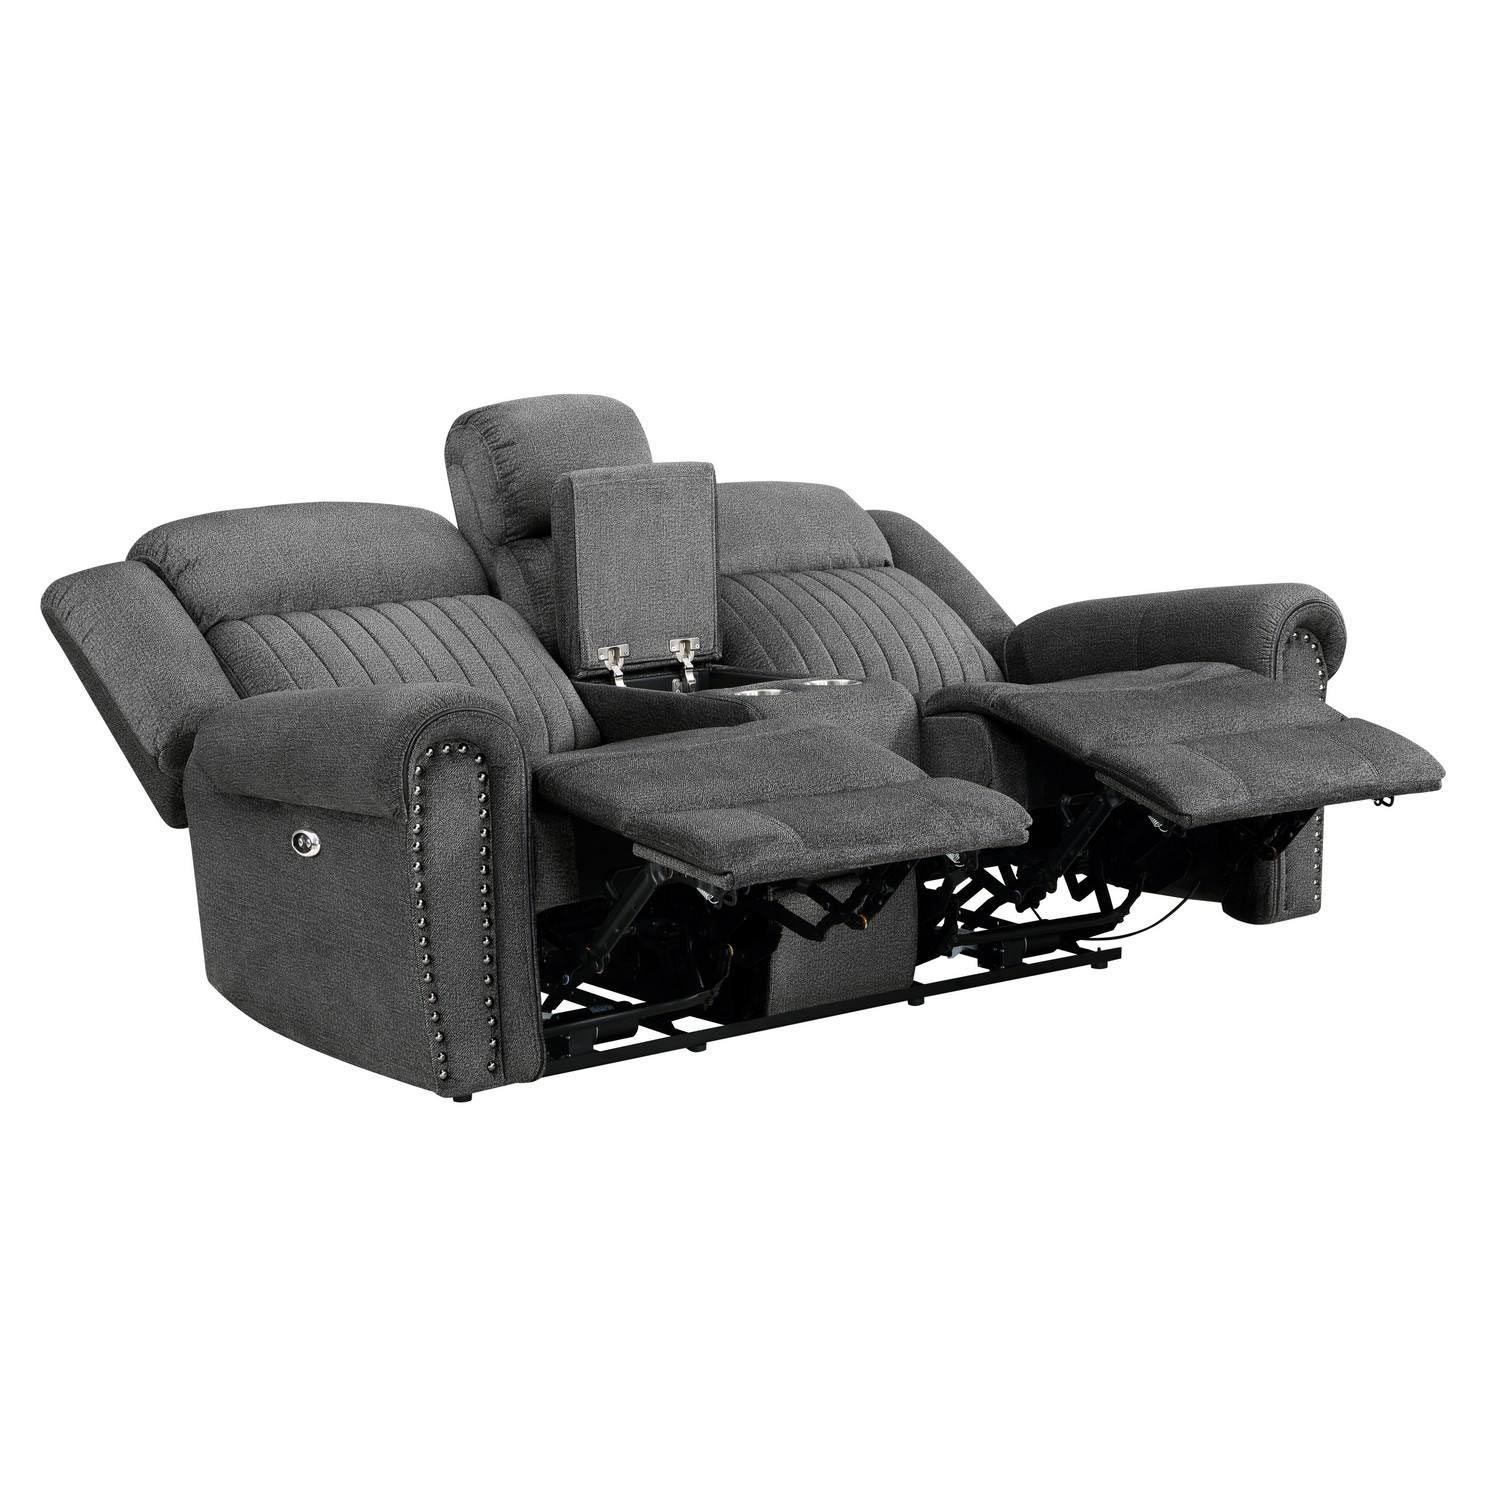 Homelegance Brennen Power Double Reclining Love Seat - Charcoal